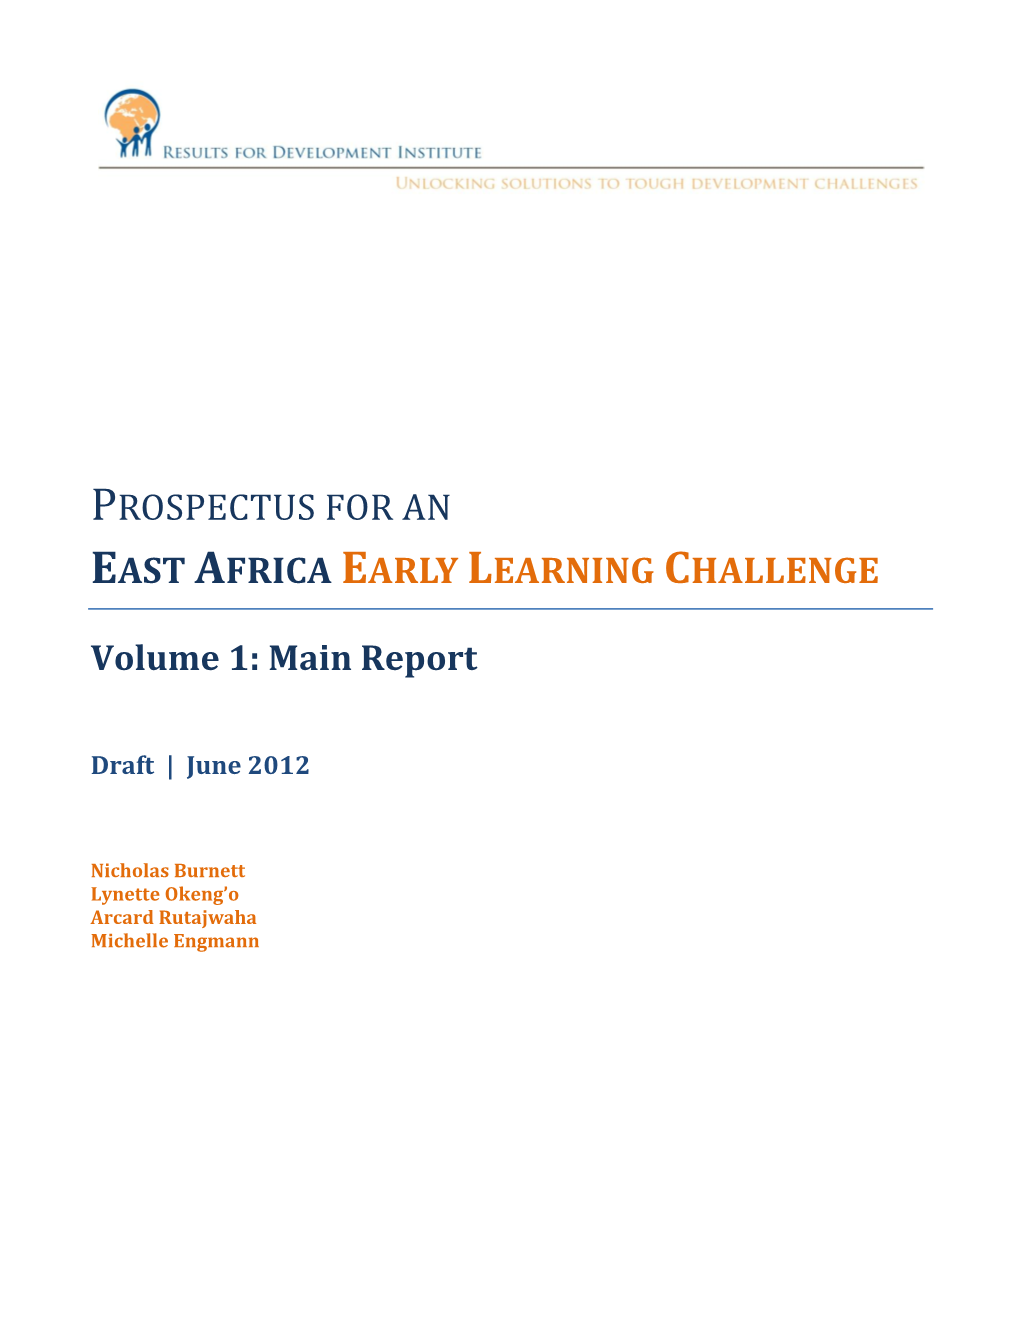 Prospectus for an East Africa Early Learning Challenge